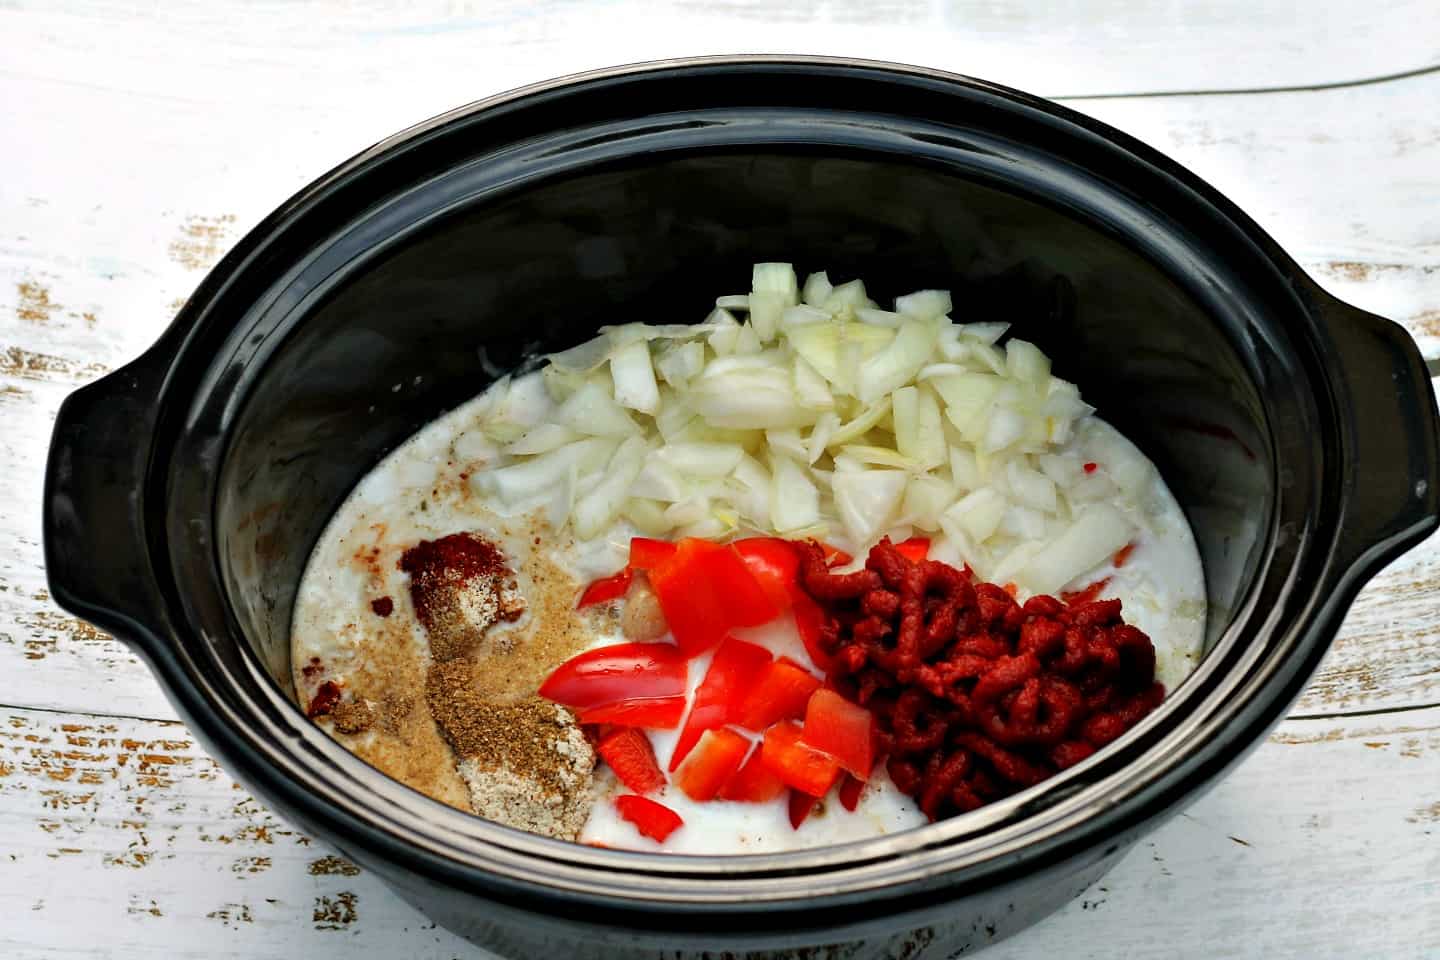 Slow cooker pot filled with curry ingredients.